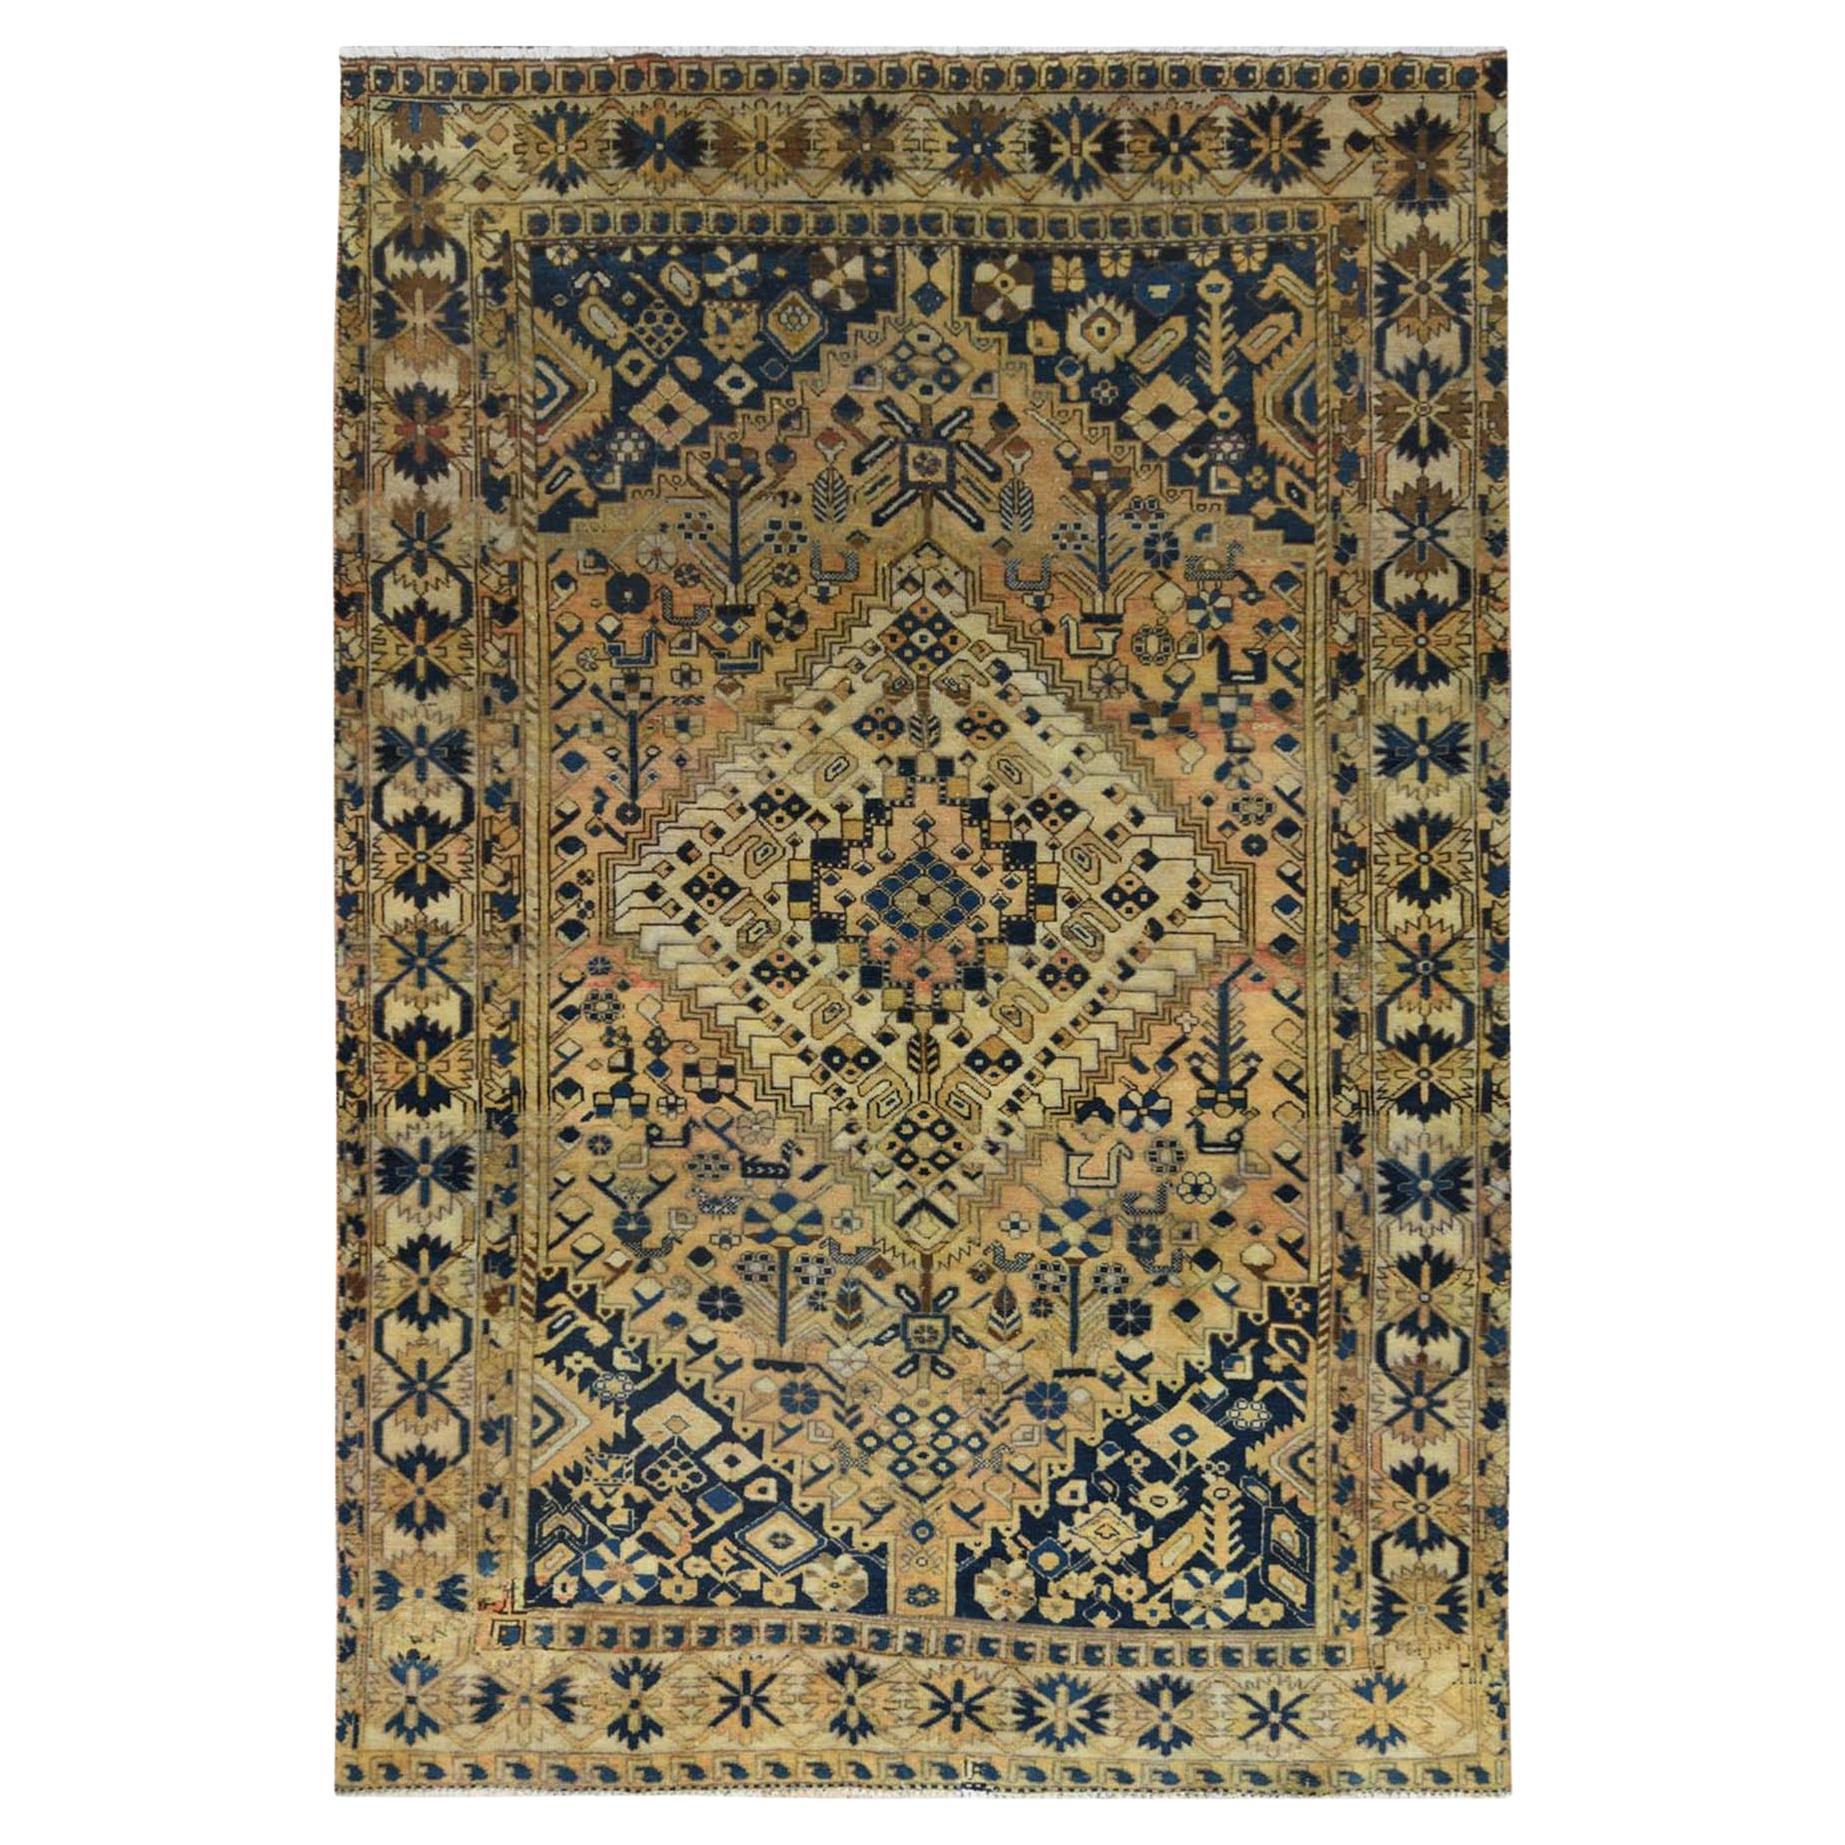 Gold Color, Vintage Persian Bakhtiar, Distressed Look Worn Wool Hand Knotted Rug